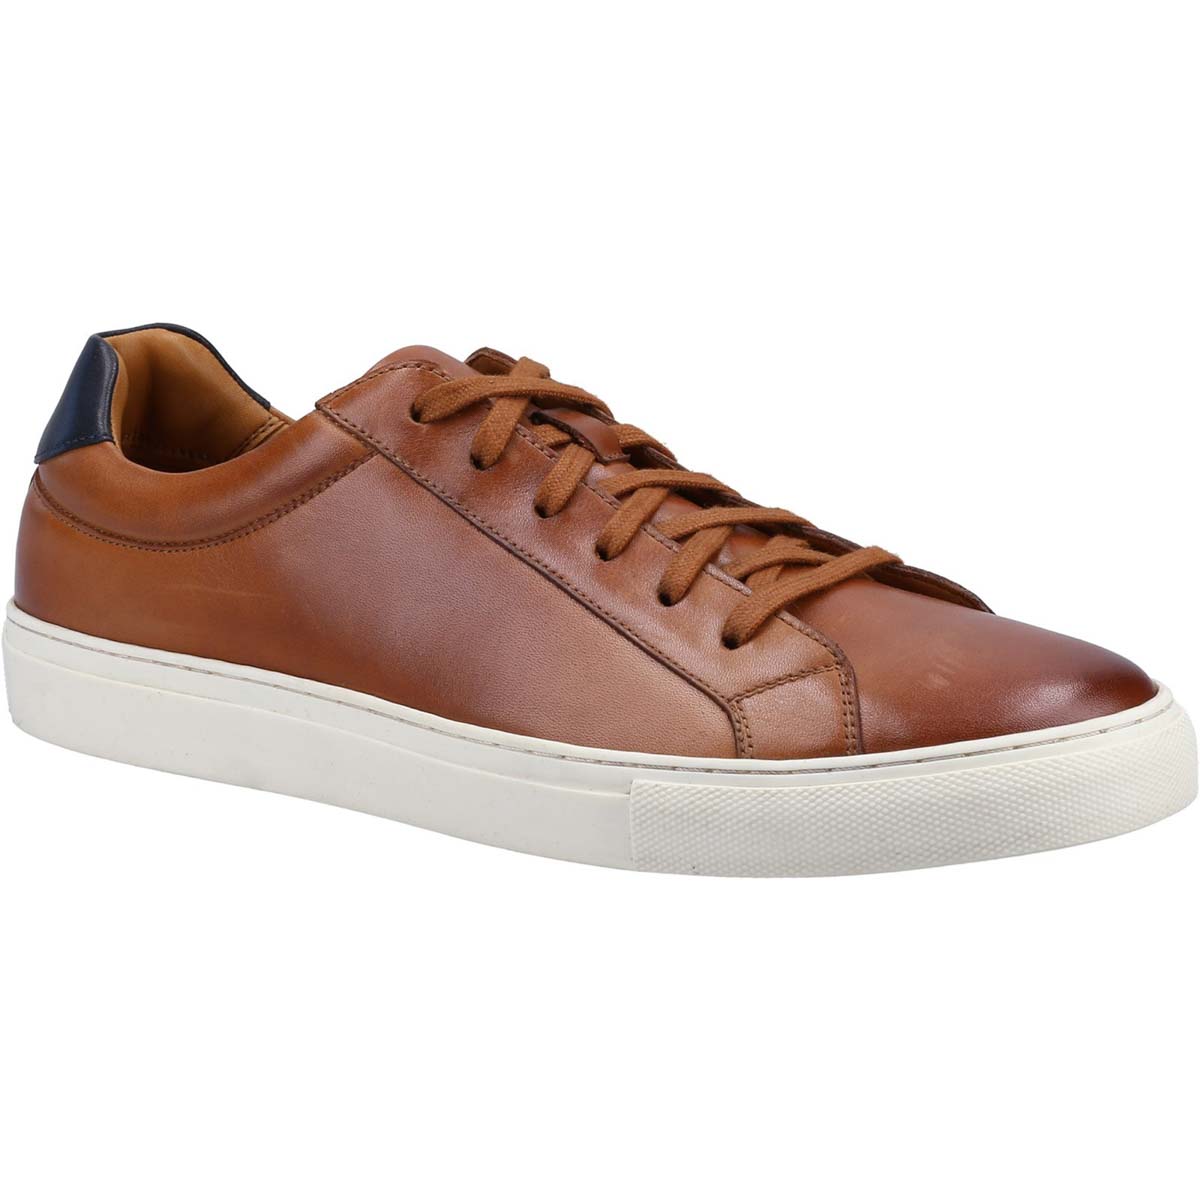 Hush Puppies Colton Tan Mens trainers 36670-68486 in a Plain Leather in Size 11